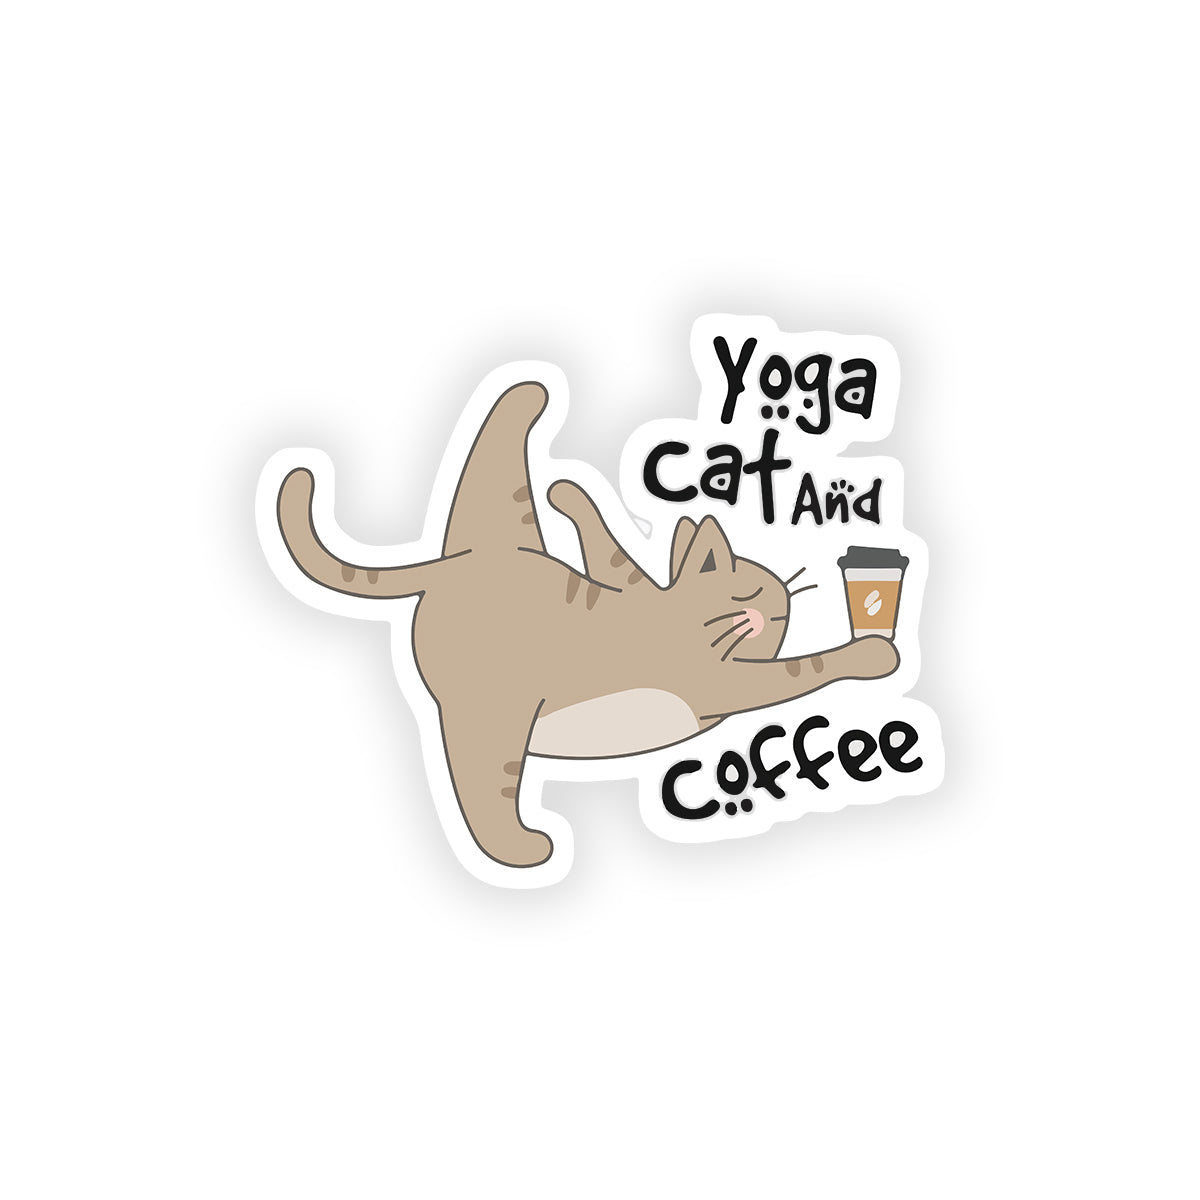 Yoga cat and coffee